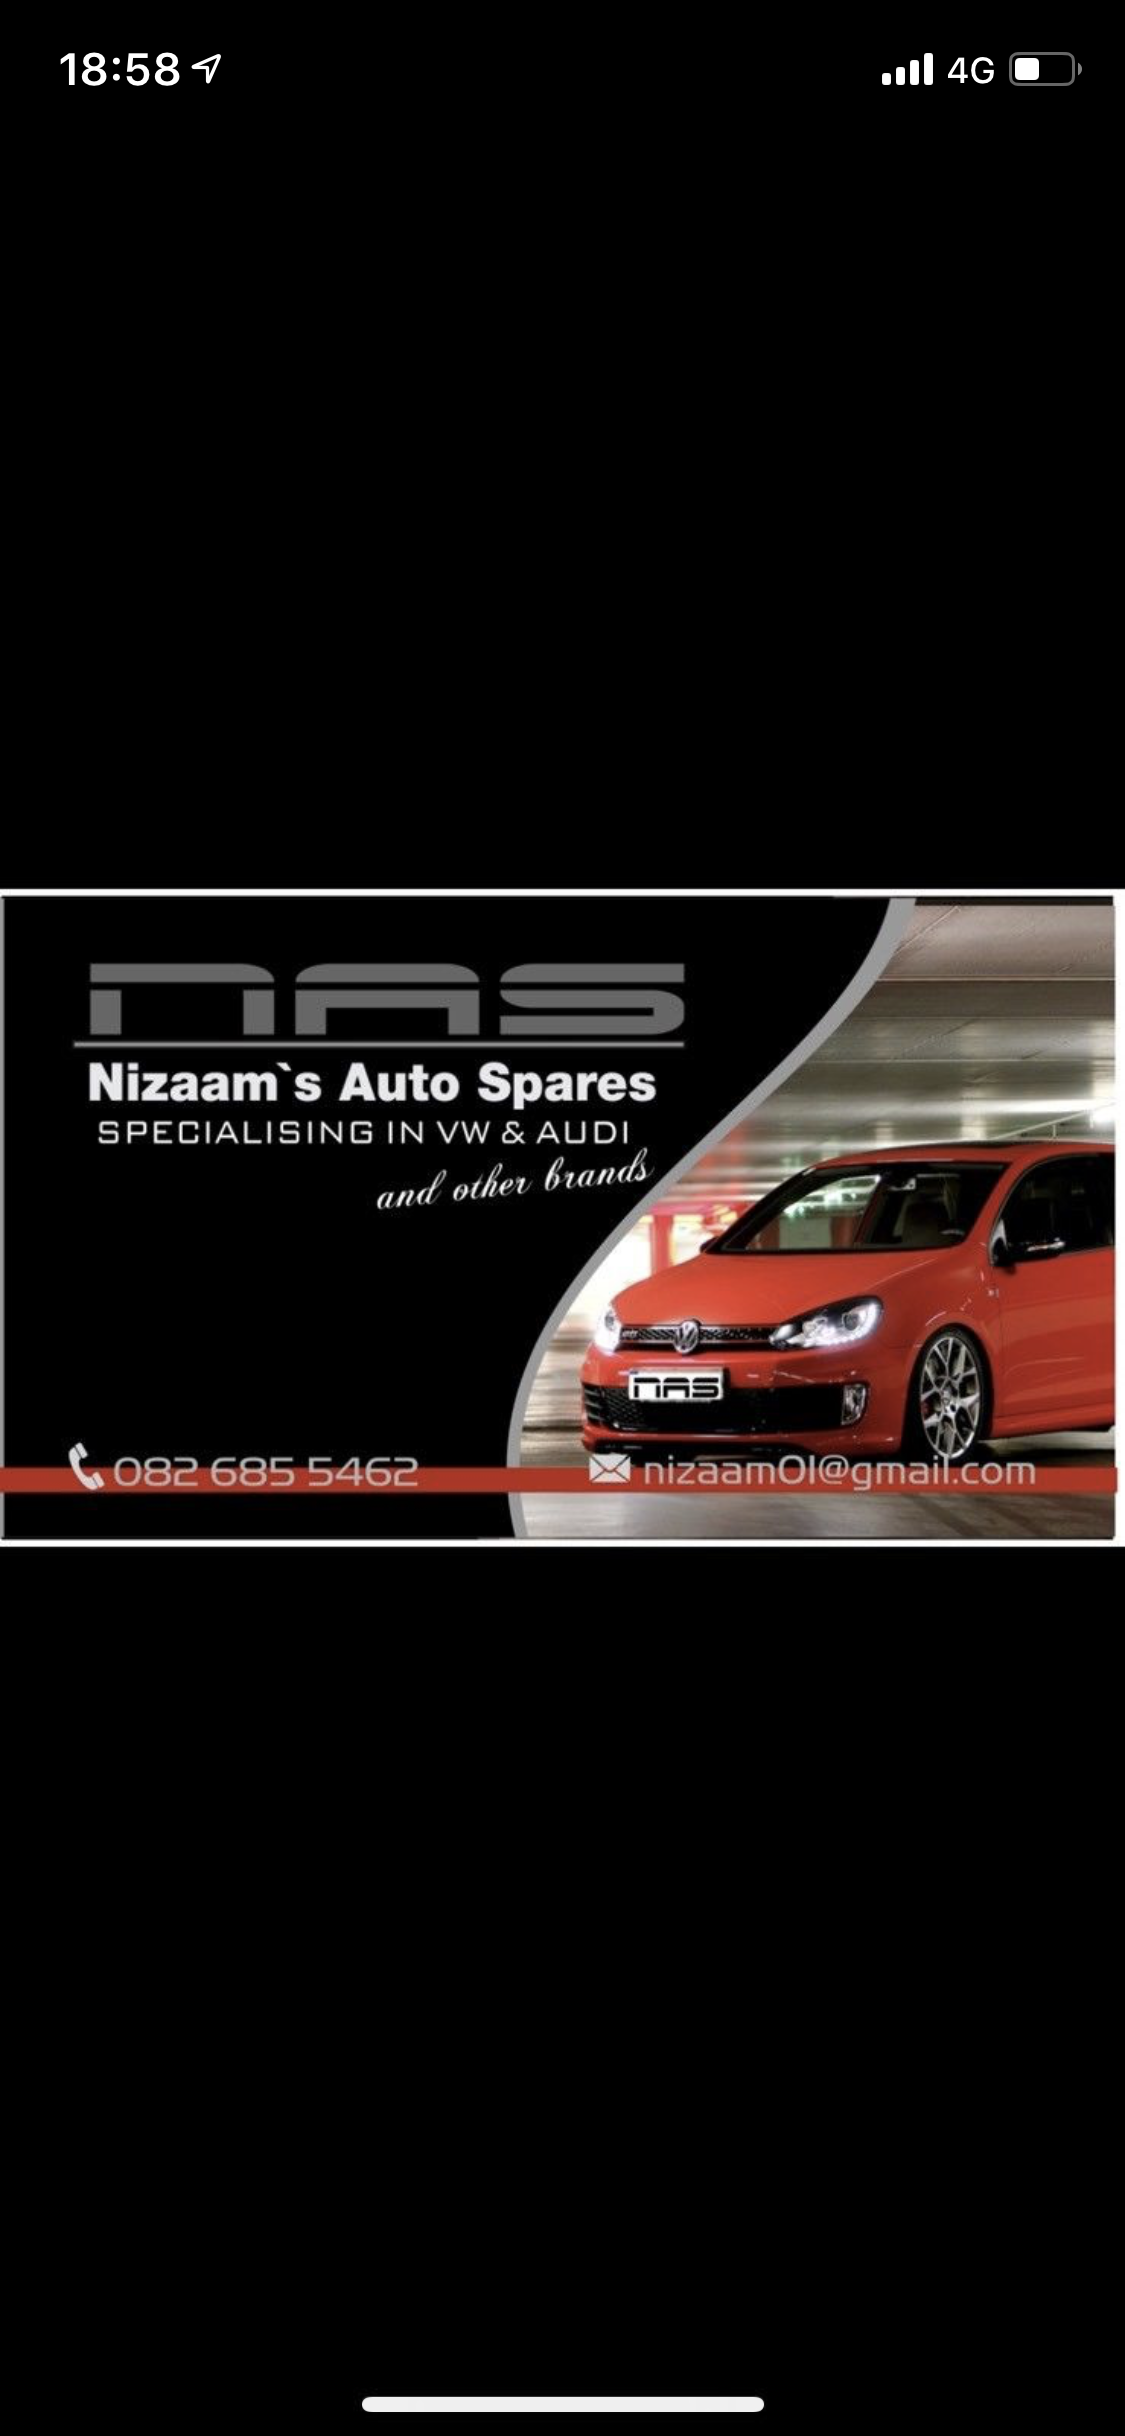 Nizaam’s Auto Spares specializing in Vw and Audi spares & repairs 